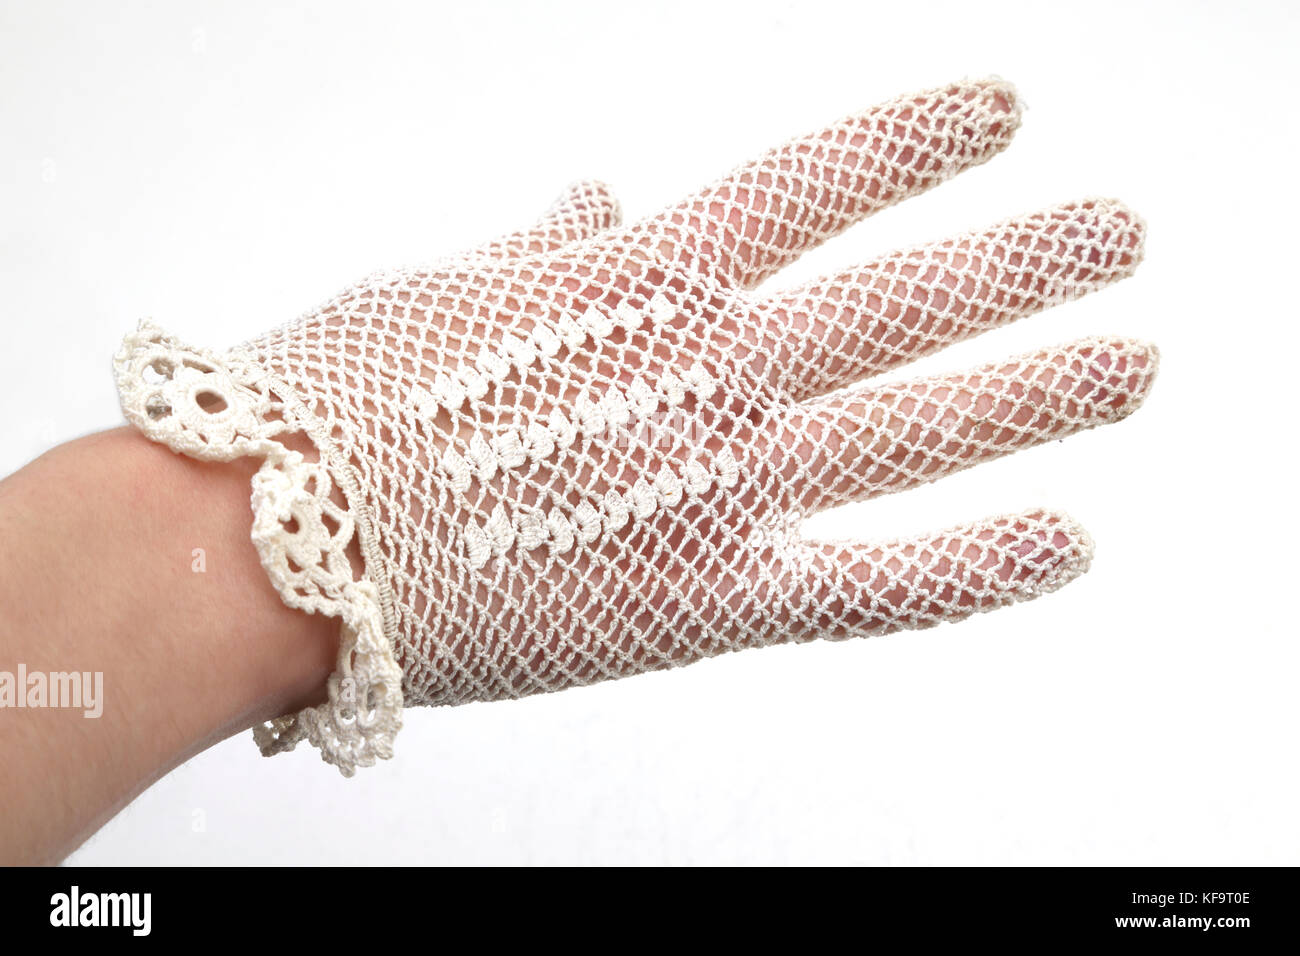 Handmade Knitted Lace Glove on hand Stock Photo